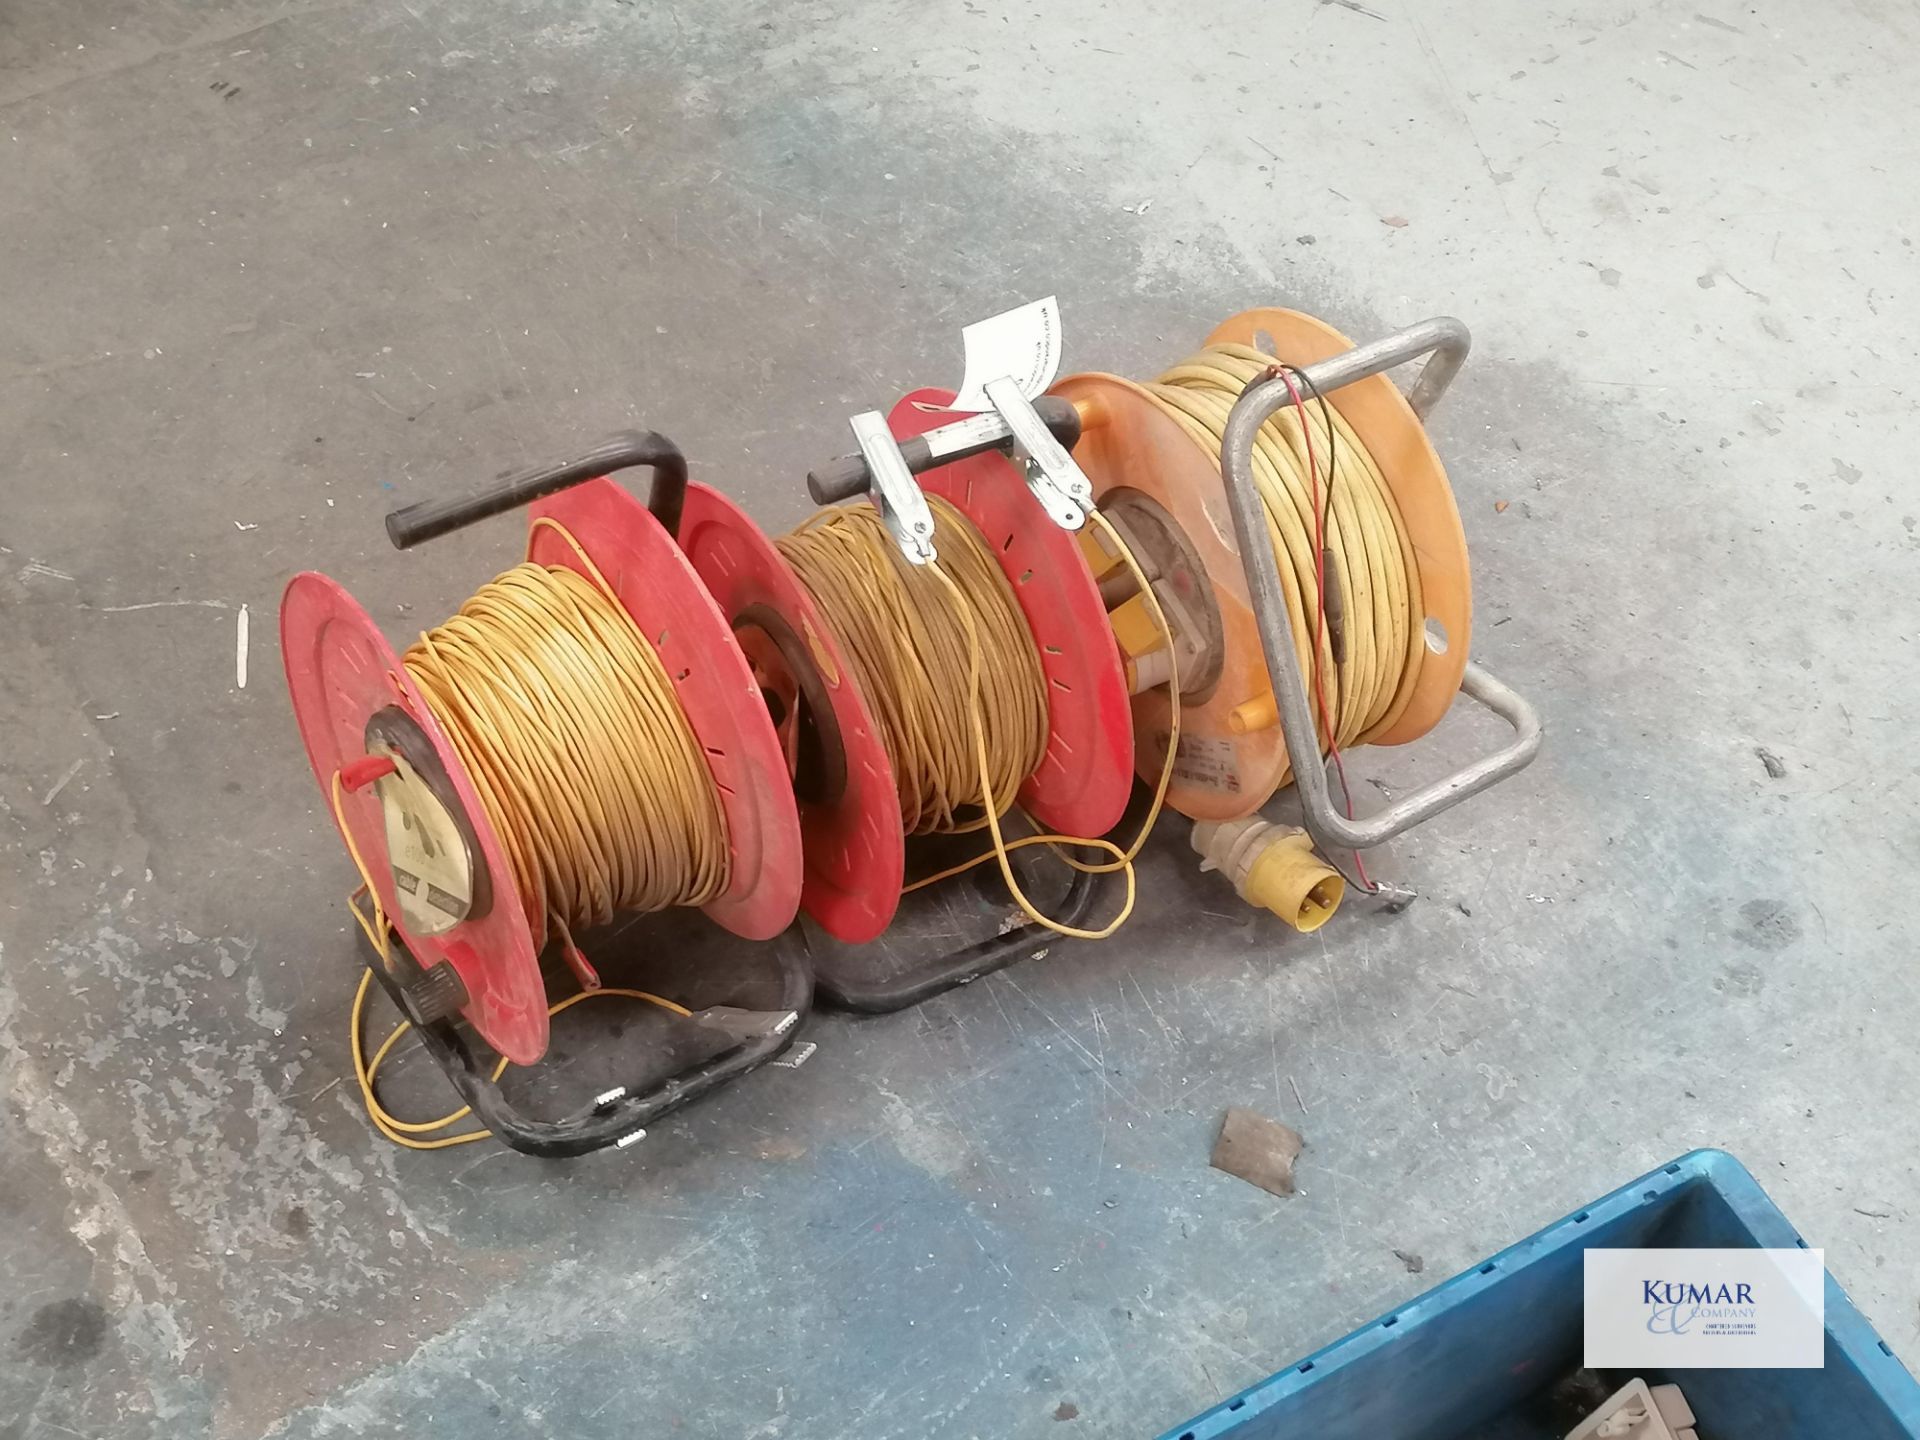 1 x 110 volt exstention cable reel and 2 x tester cables reels